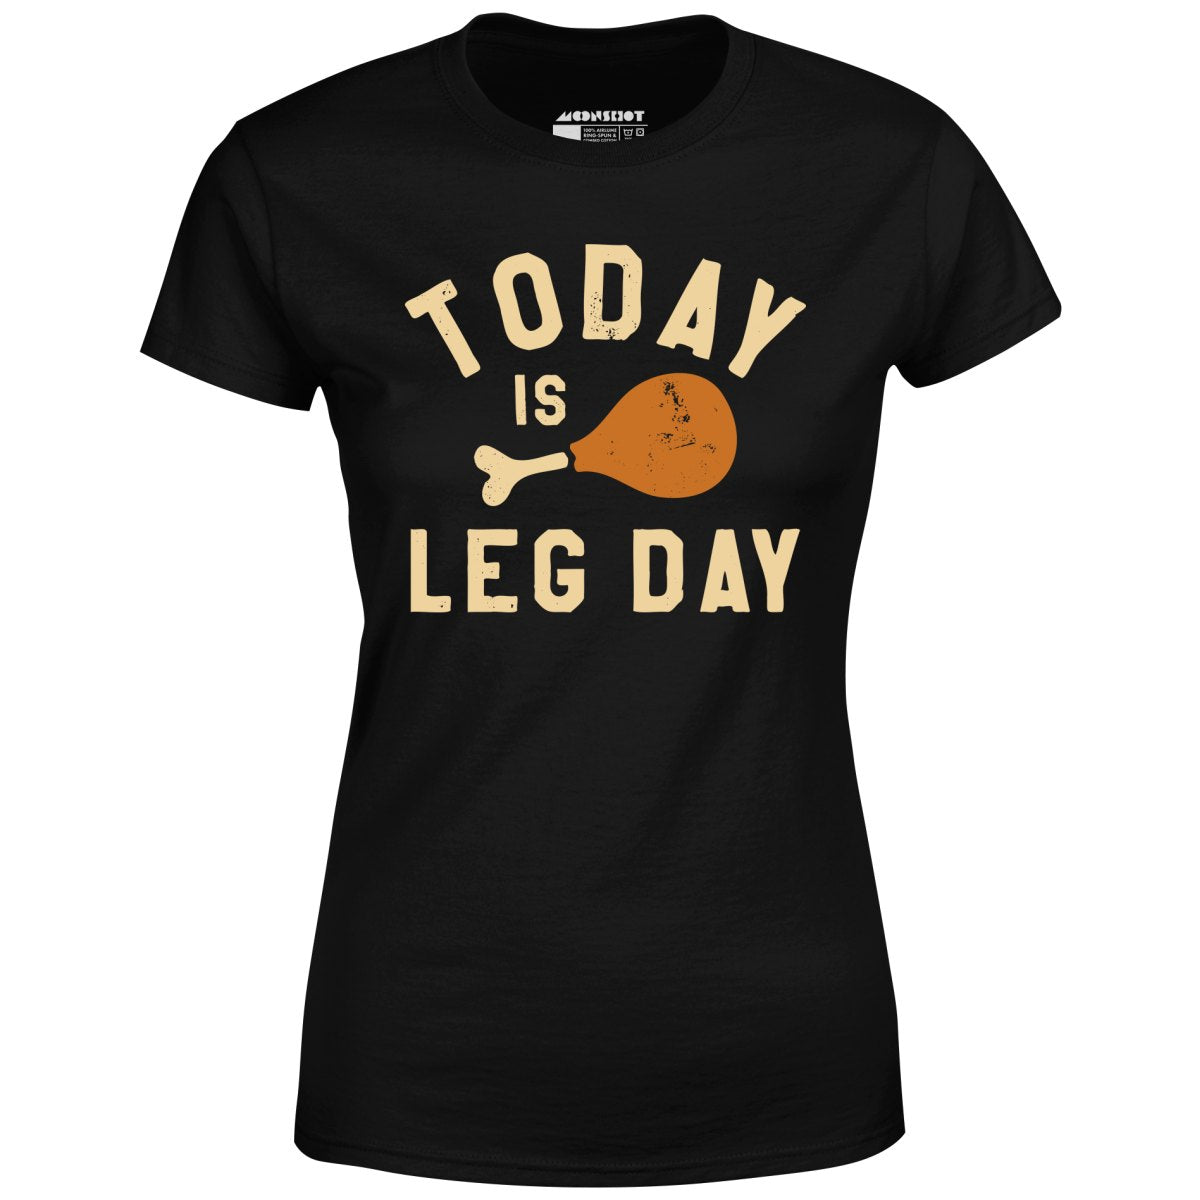 Today is Leg Day - Women's T-Shirt